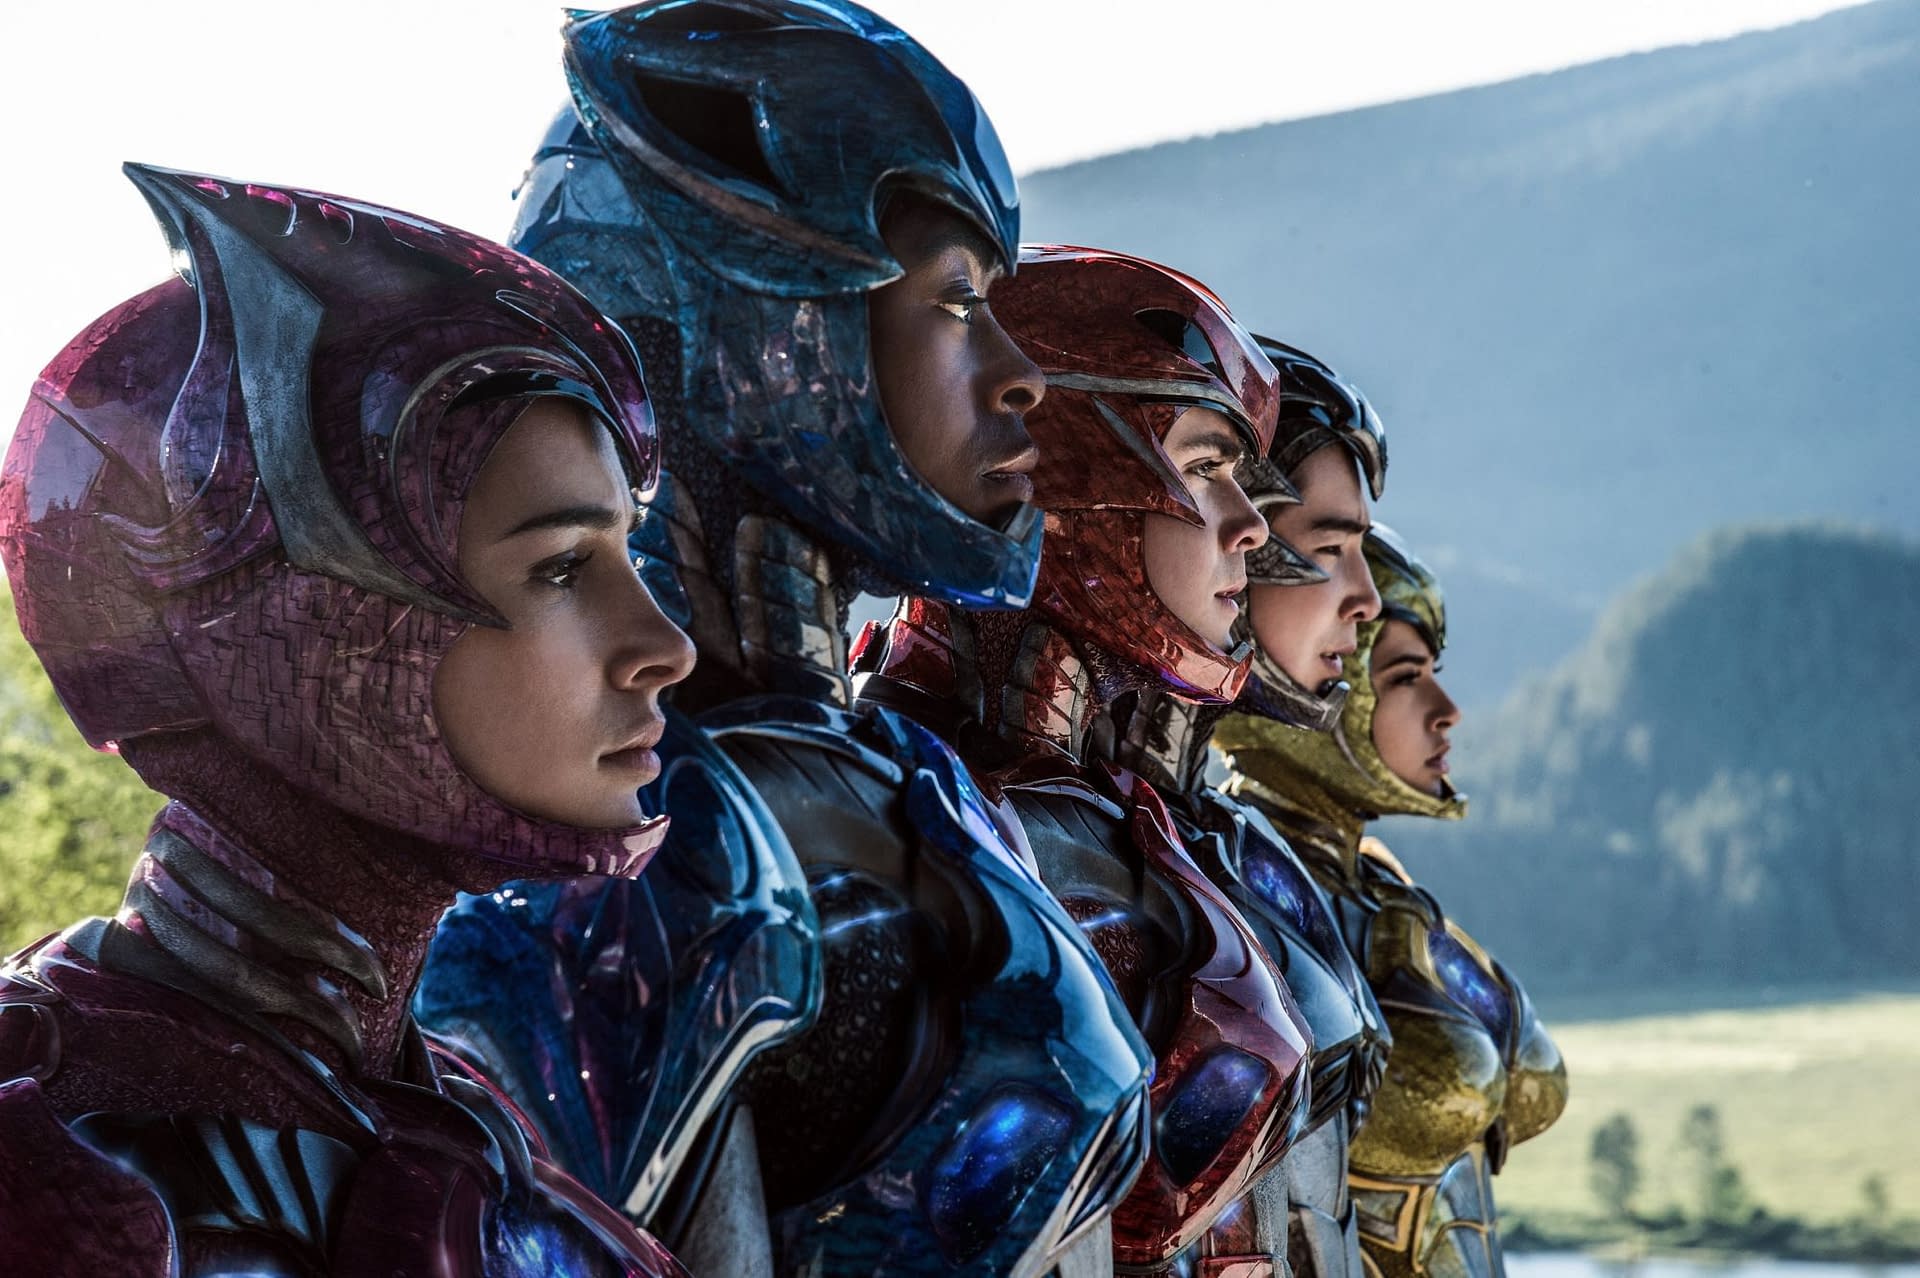 Power Rangers: Is A Reboot Necessary?